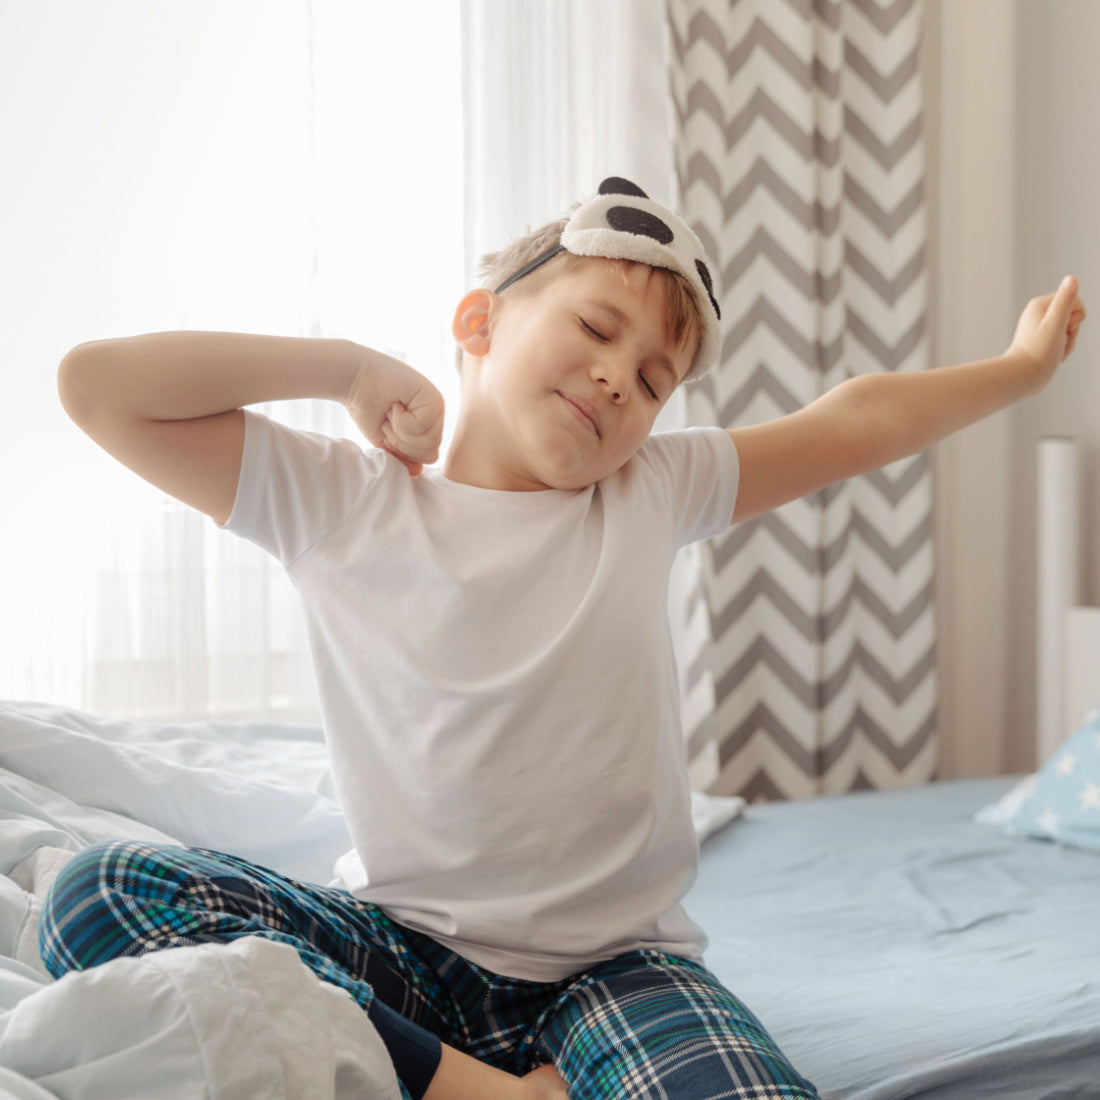 15 Morning Affirmations for Kids to Grow Their Self-Confidence